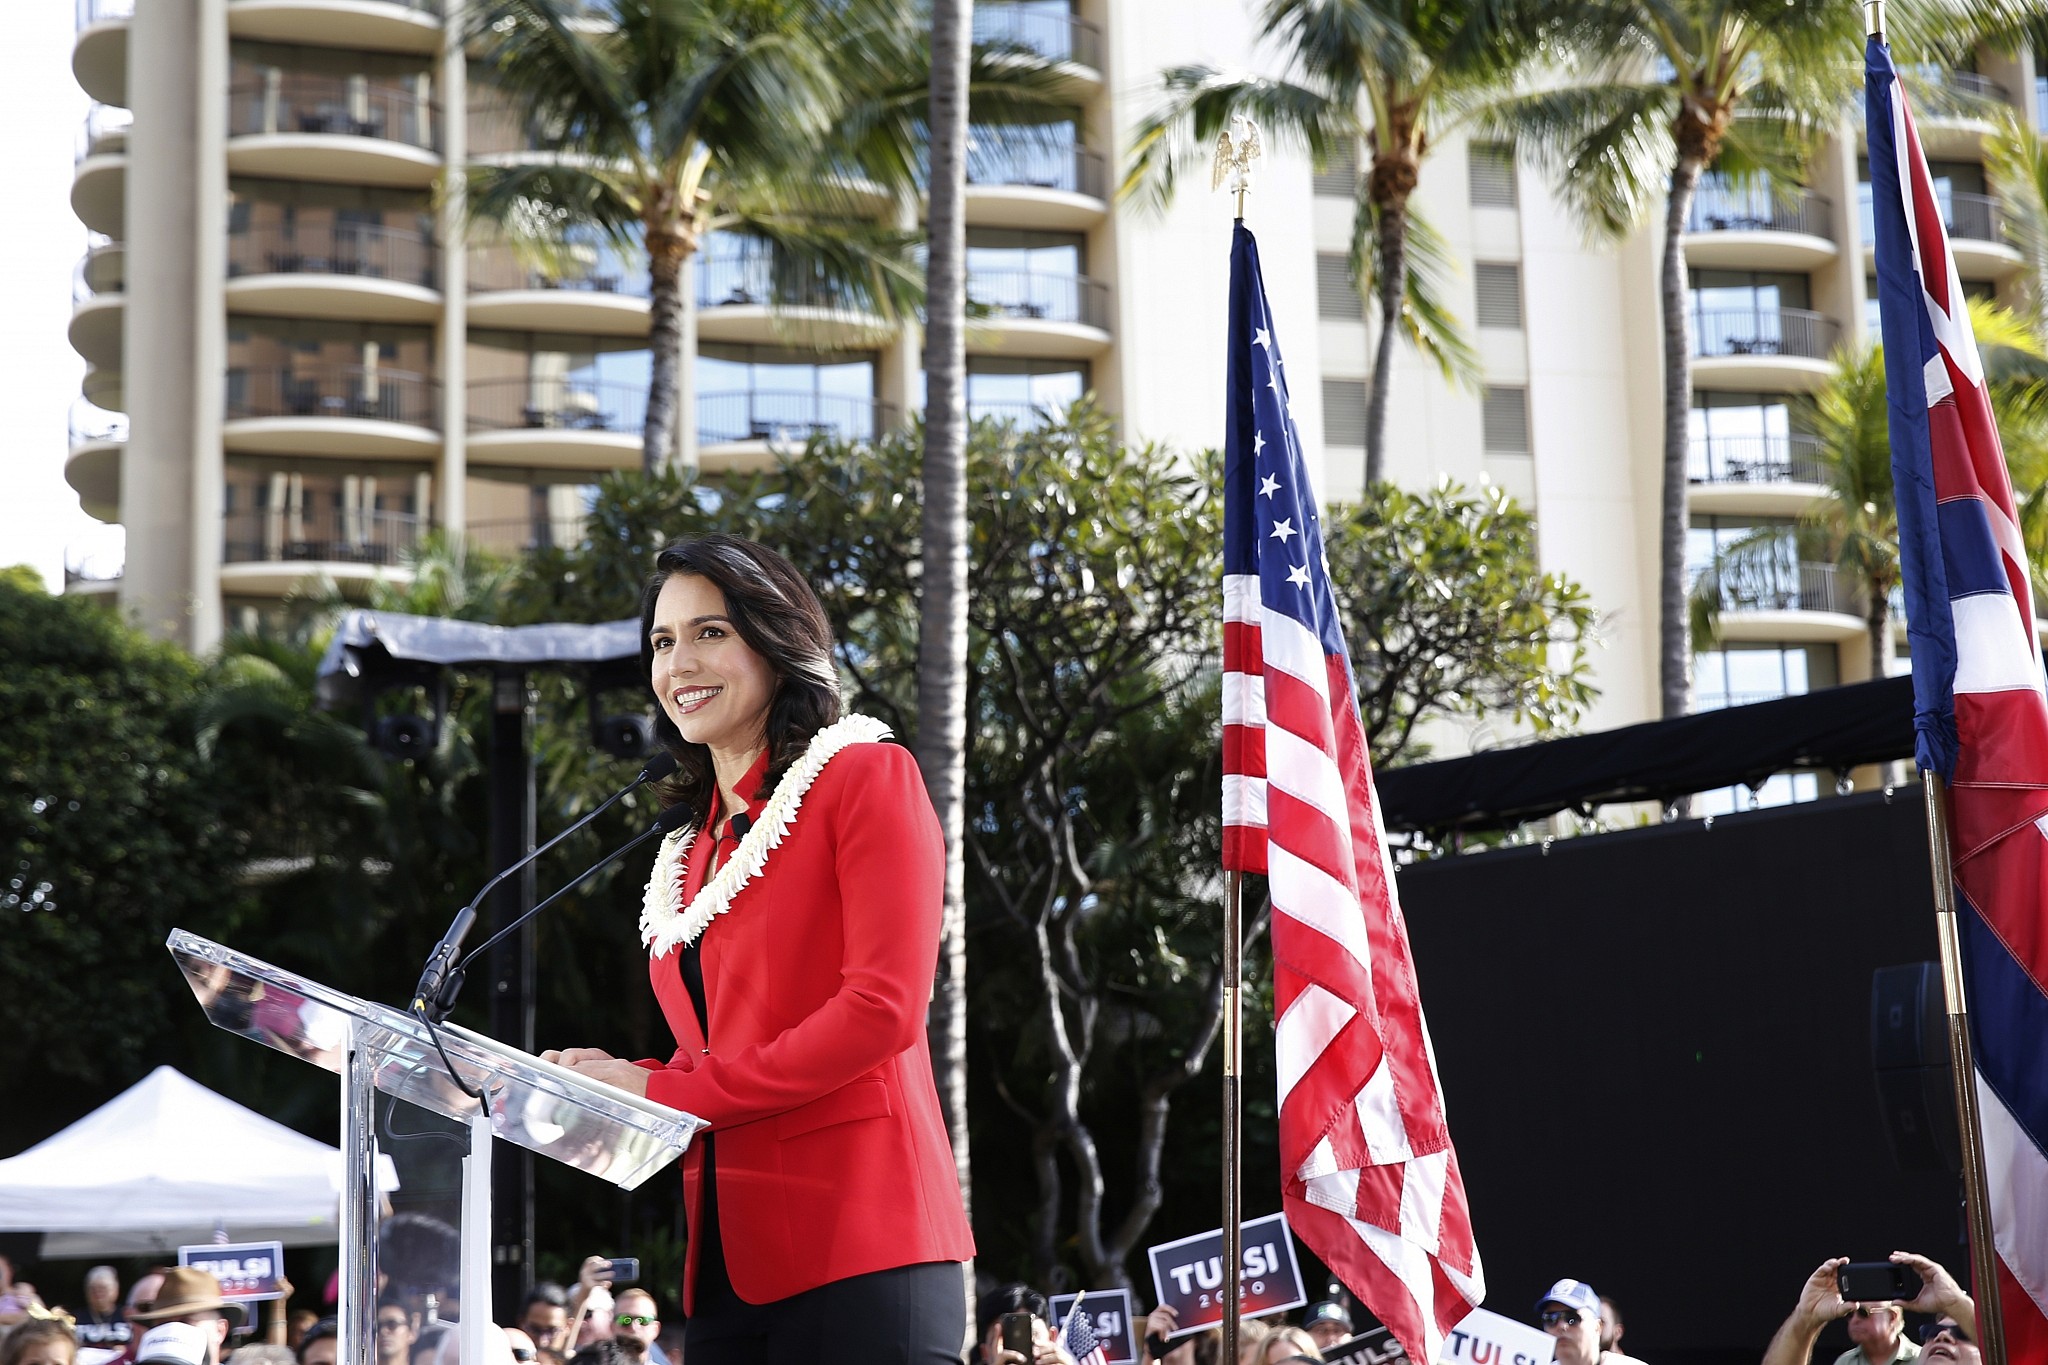 Tulsi Gabbard rejects David Duke endorsement for president | The Times of Israel2048 x 1365